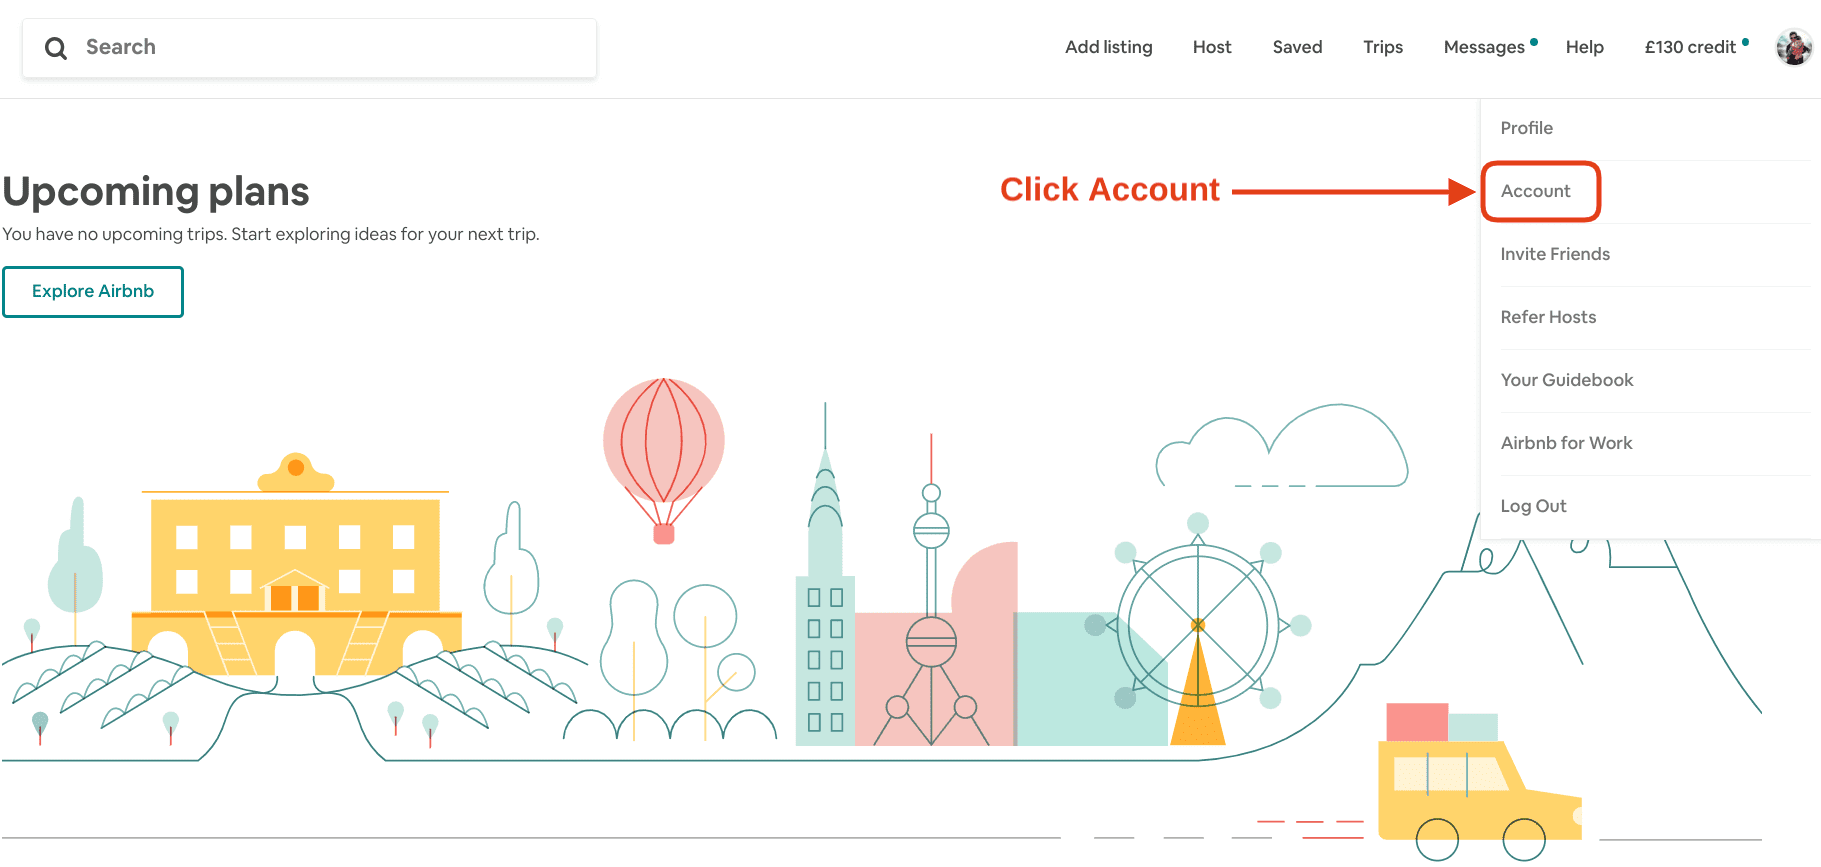 Airbnb Hosting The homepage of an Airbnb hosting website with an image of a city.